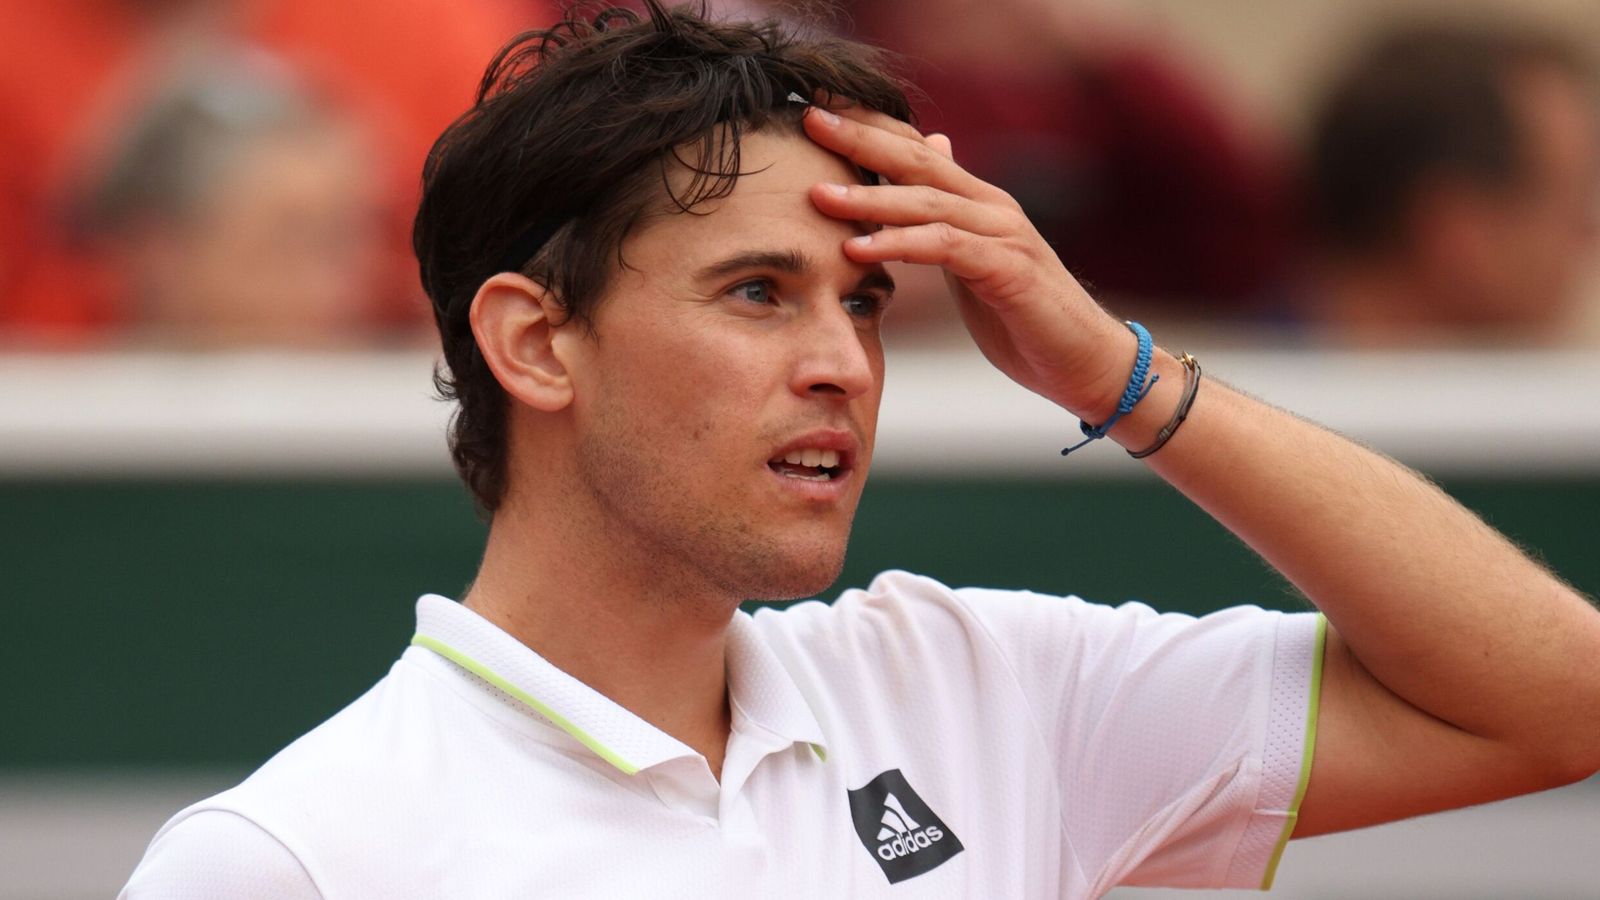 I think I'm sick simultaneous Pastries French Open: Dominic Thiem makes early exit as he loses to Hugo Dellien in  first round at Roland Garros | Tennis News | Sky Sports